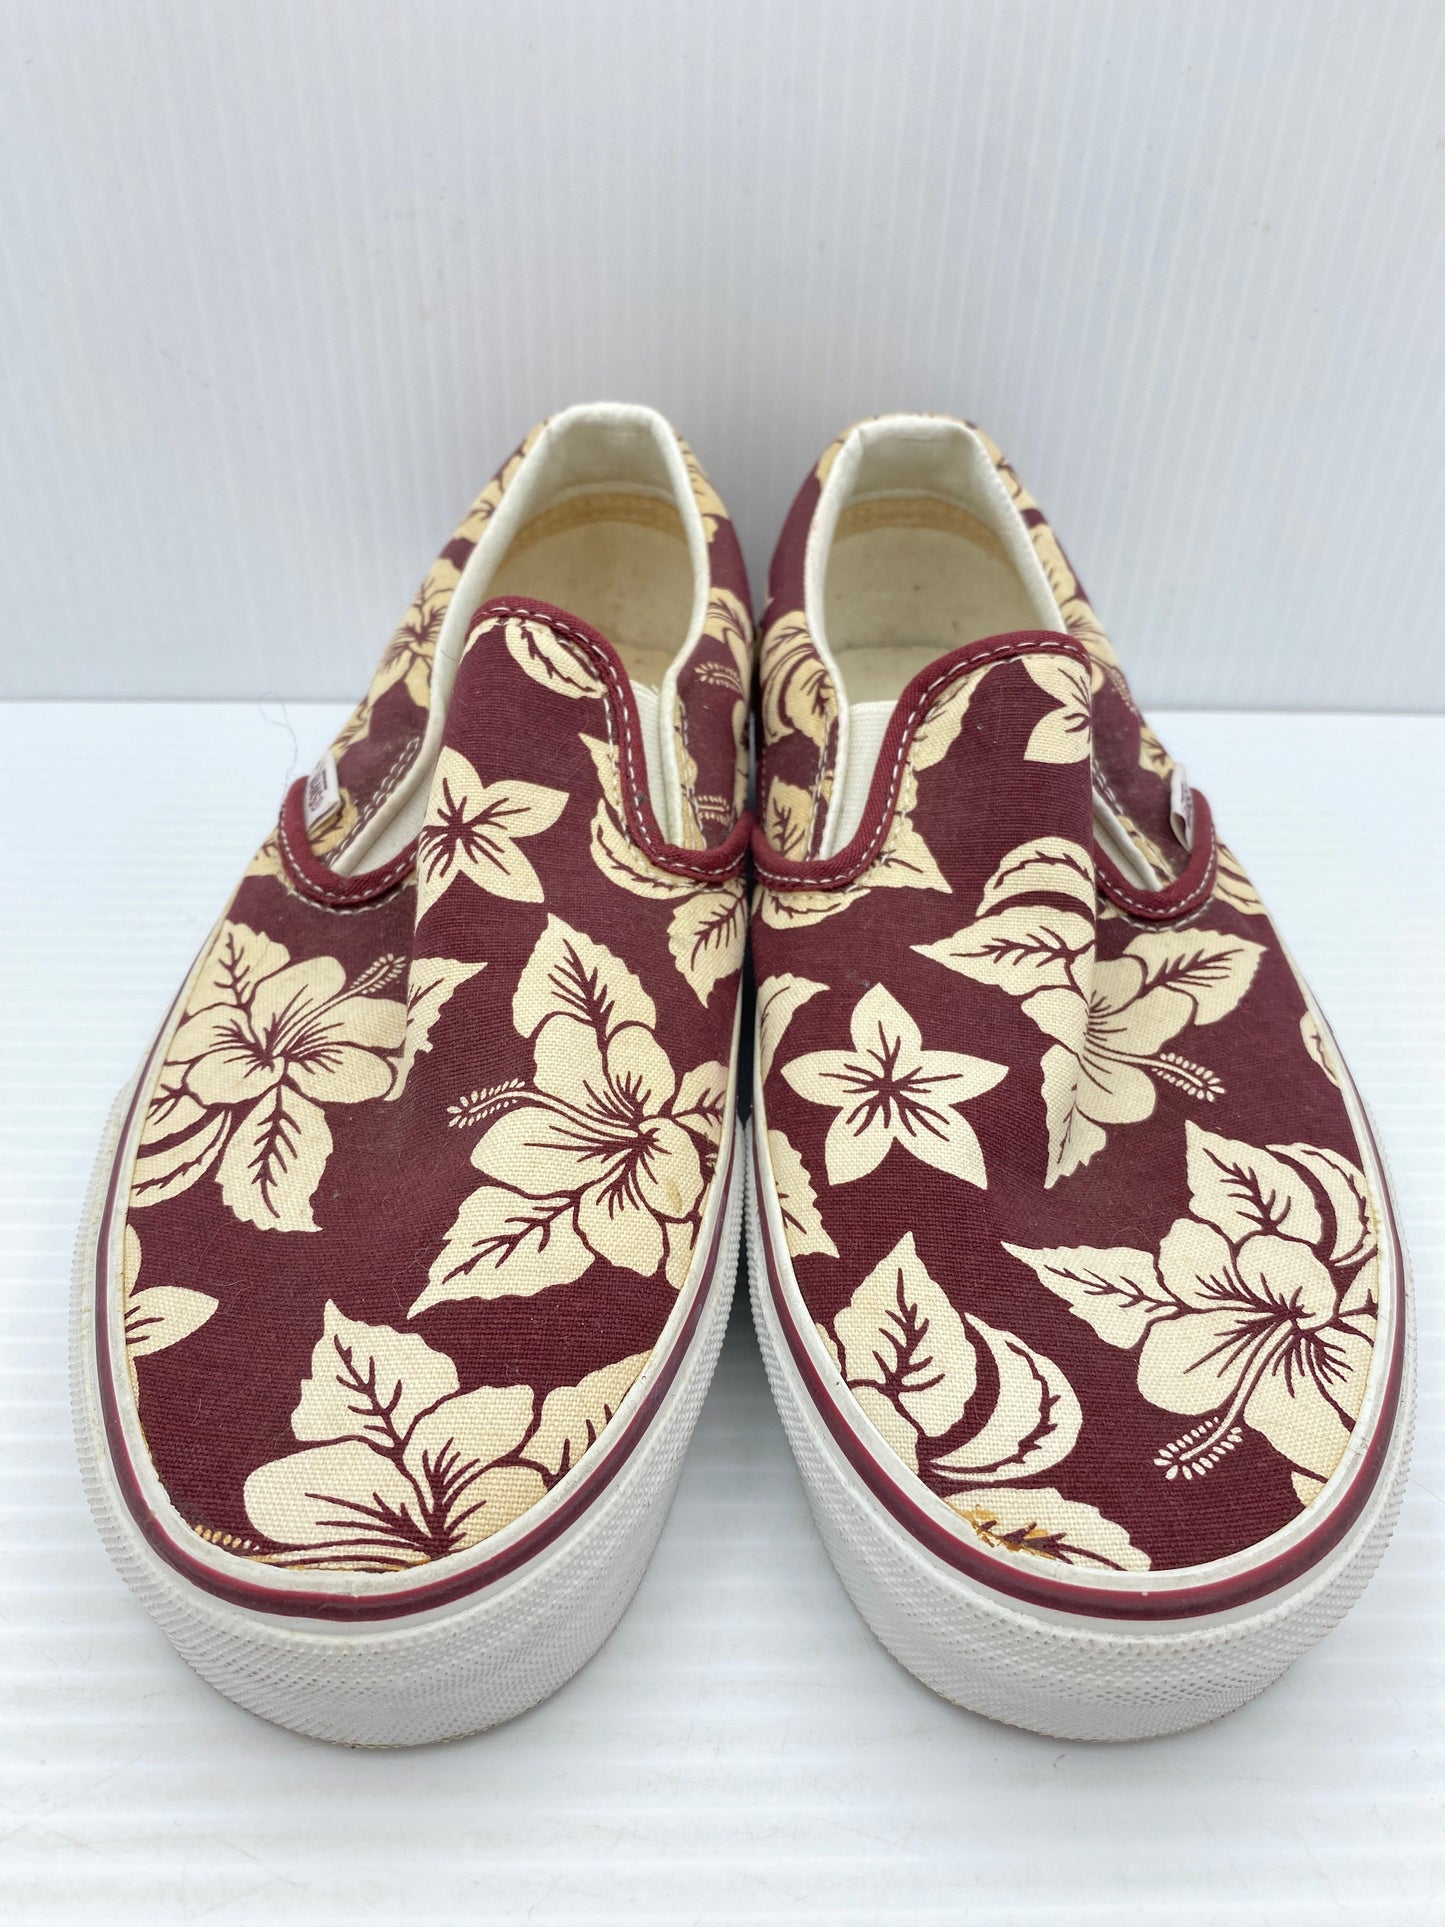 Shoes Flats Loafer Oxford By Vans  Size: 8.5